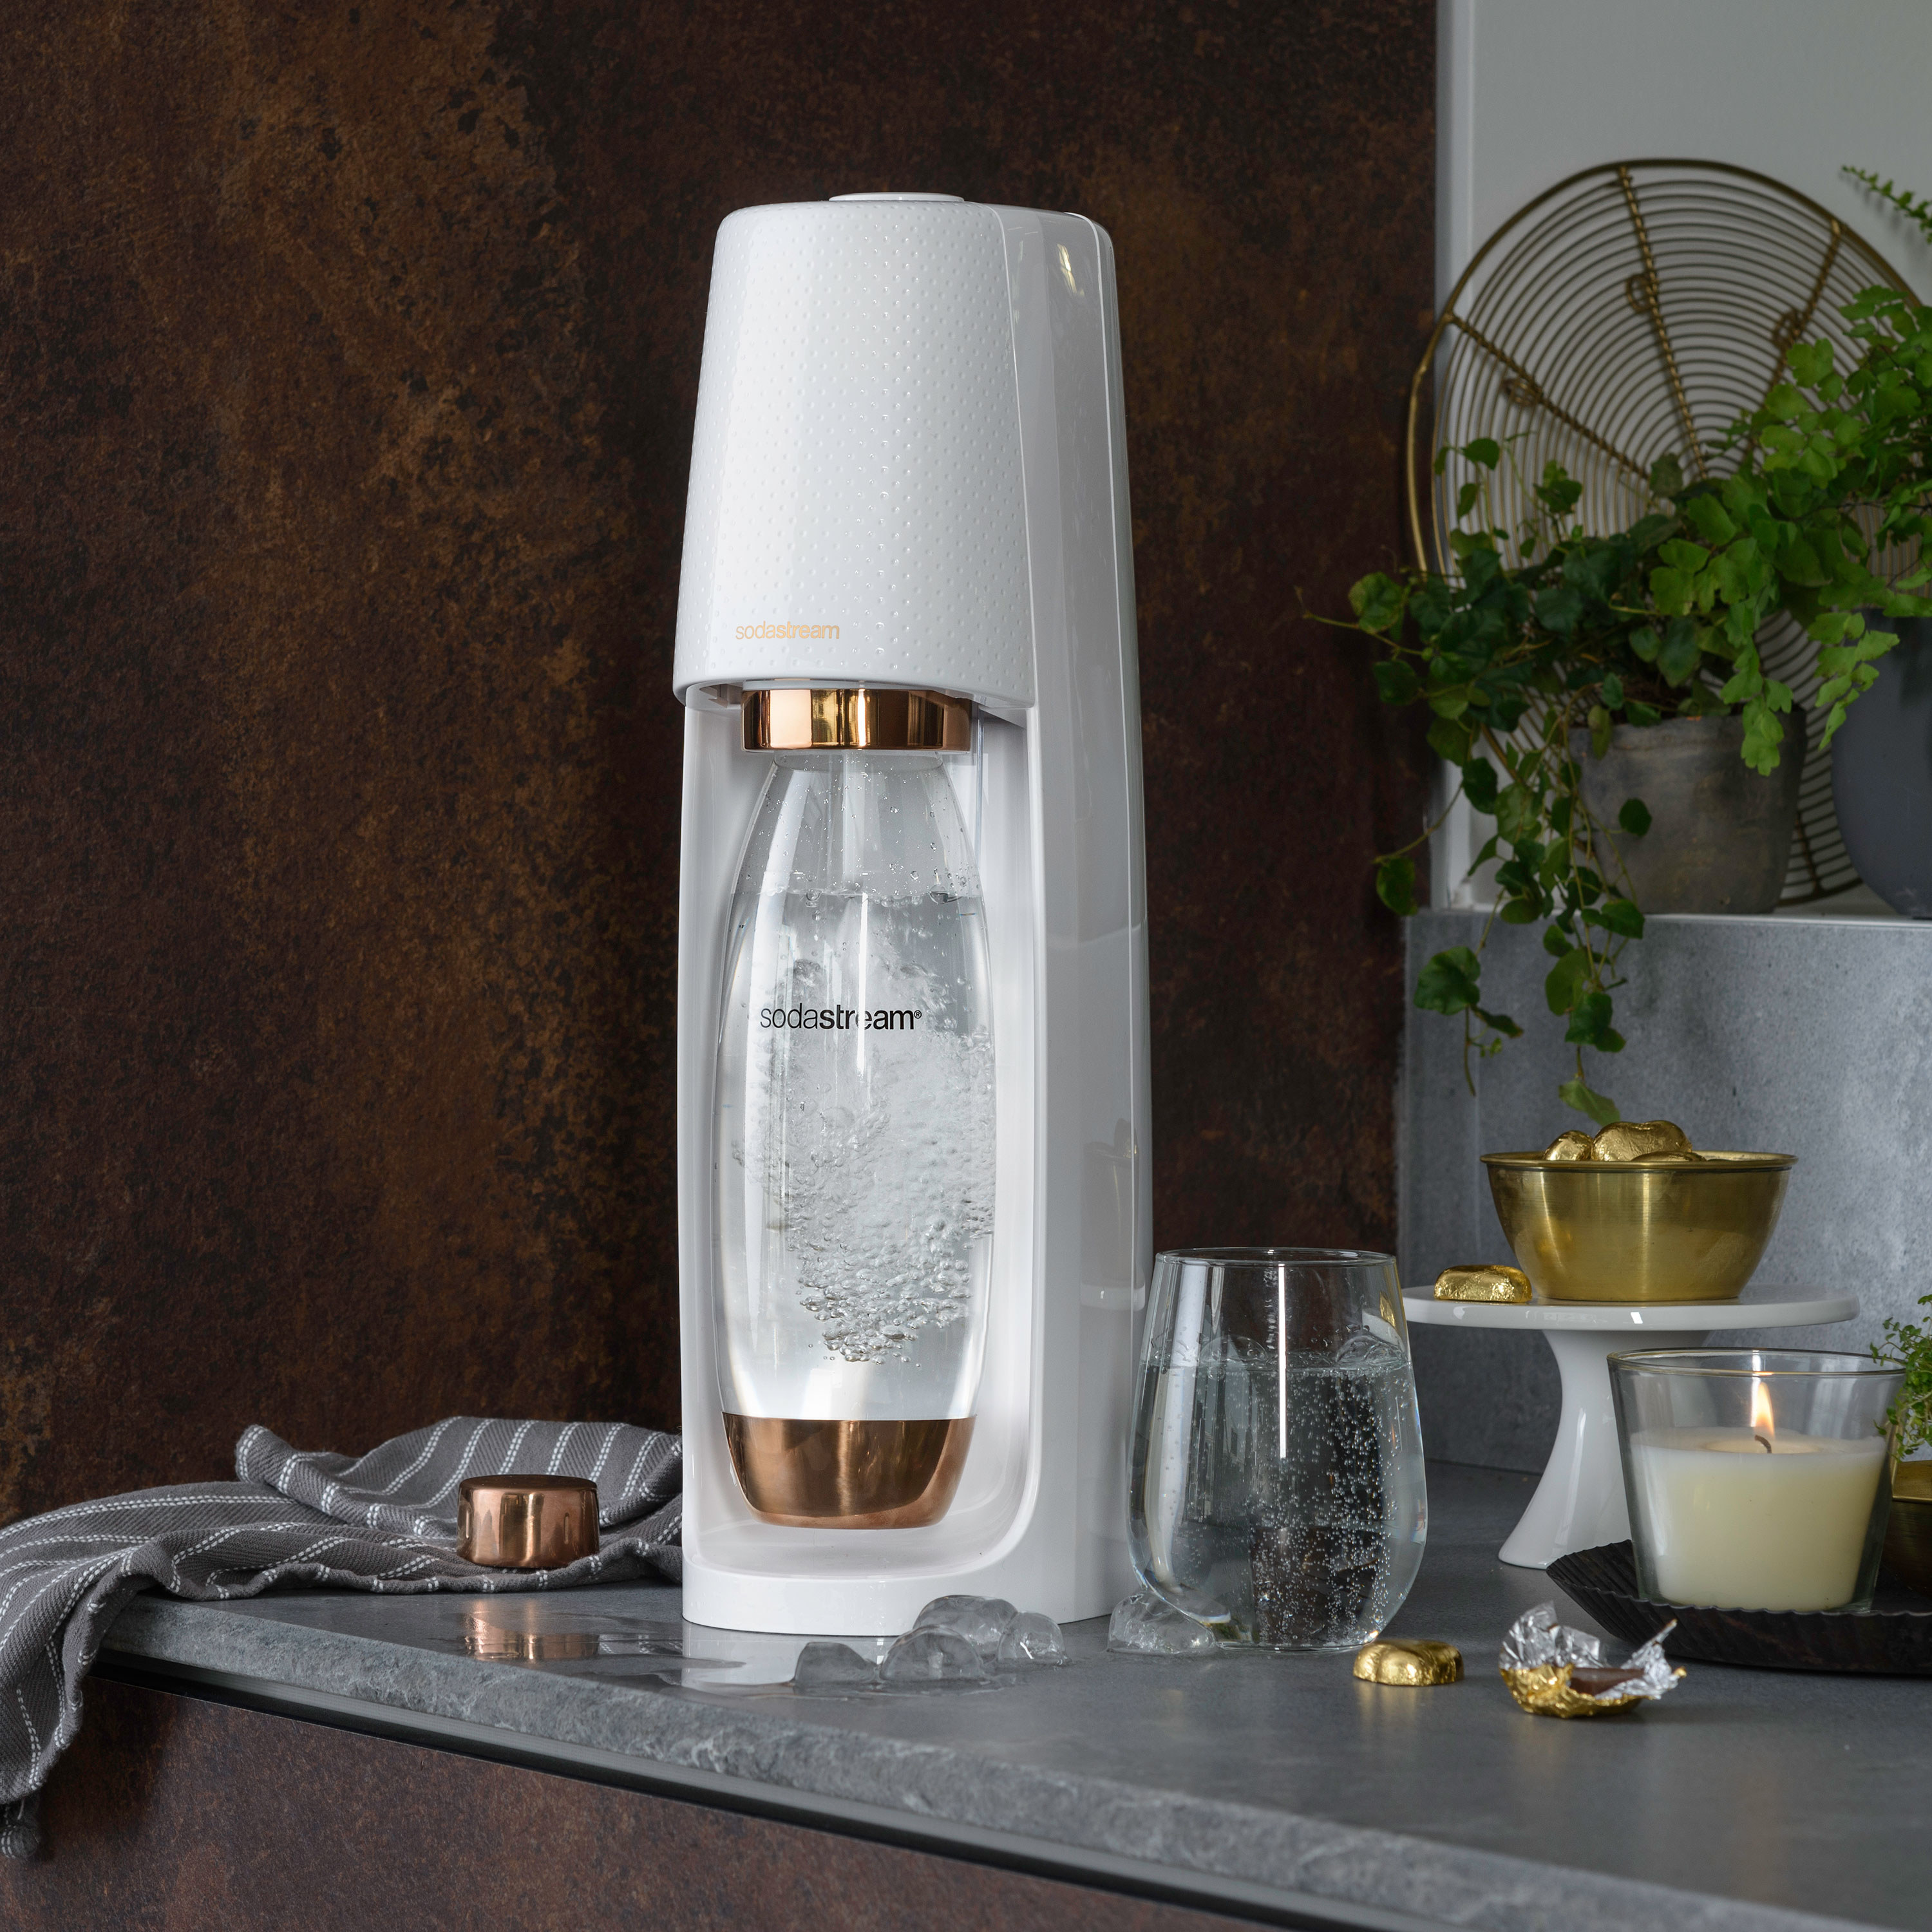 white sodastream machine with rose gold details